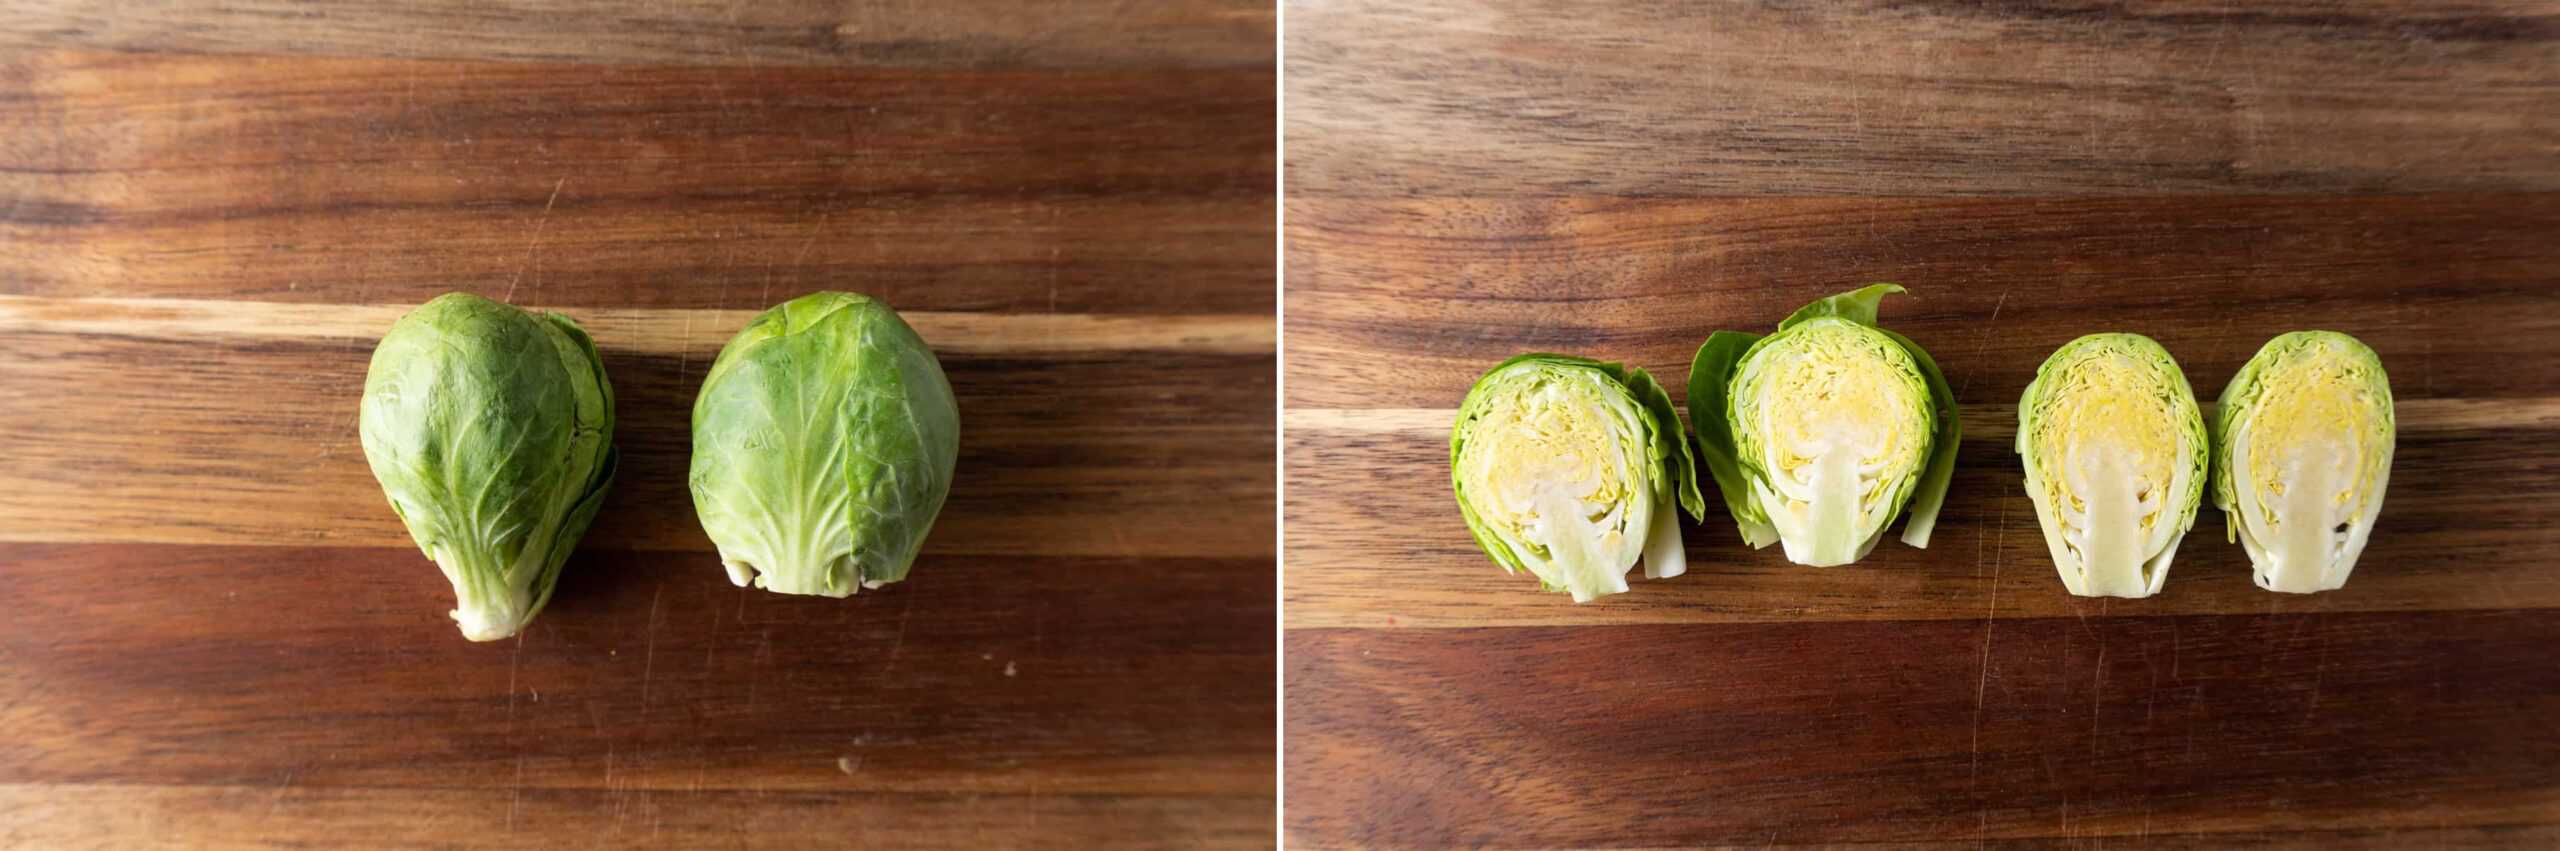 How to trim and cut brussel sprouts